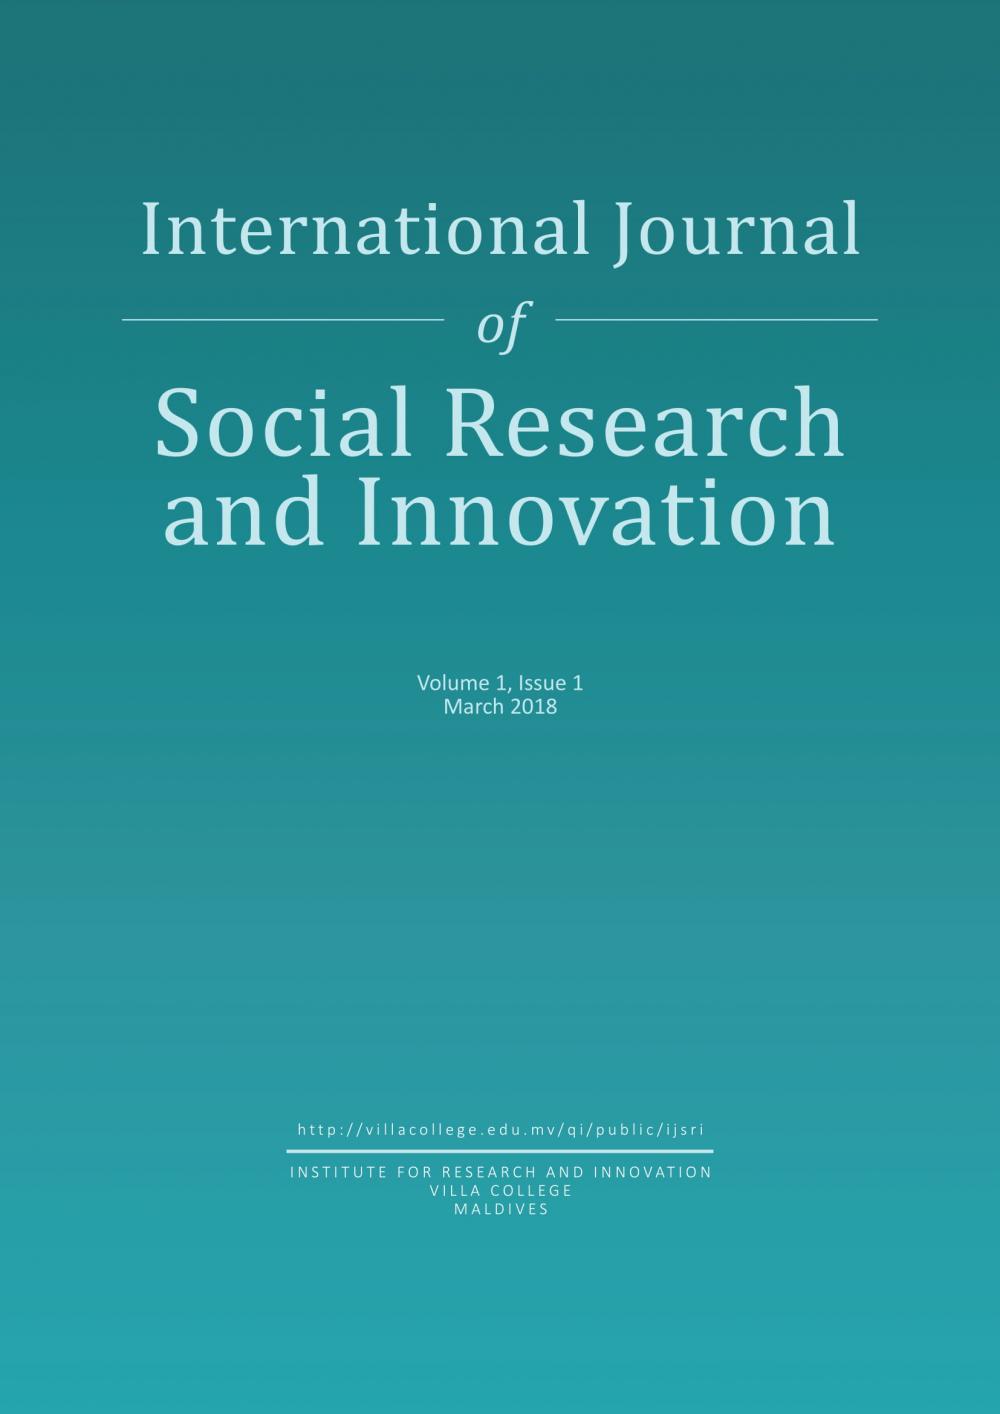 					View Vol. 1 No. 1 (2018): International Journal of Social Research and Innovation
				